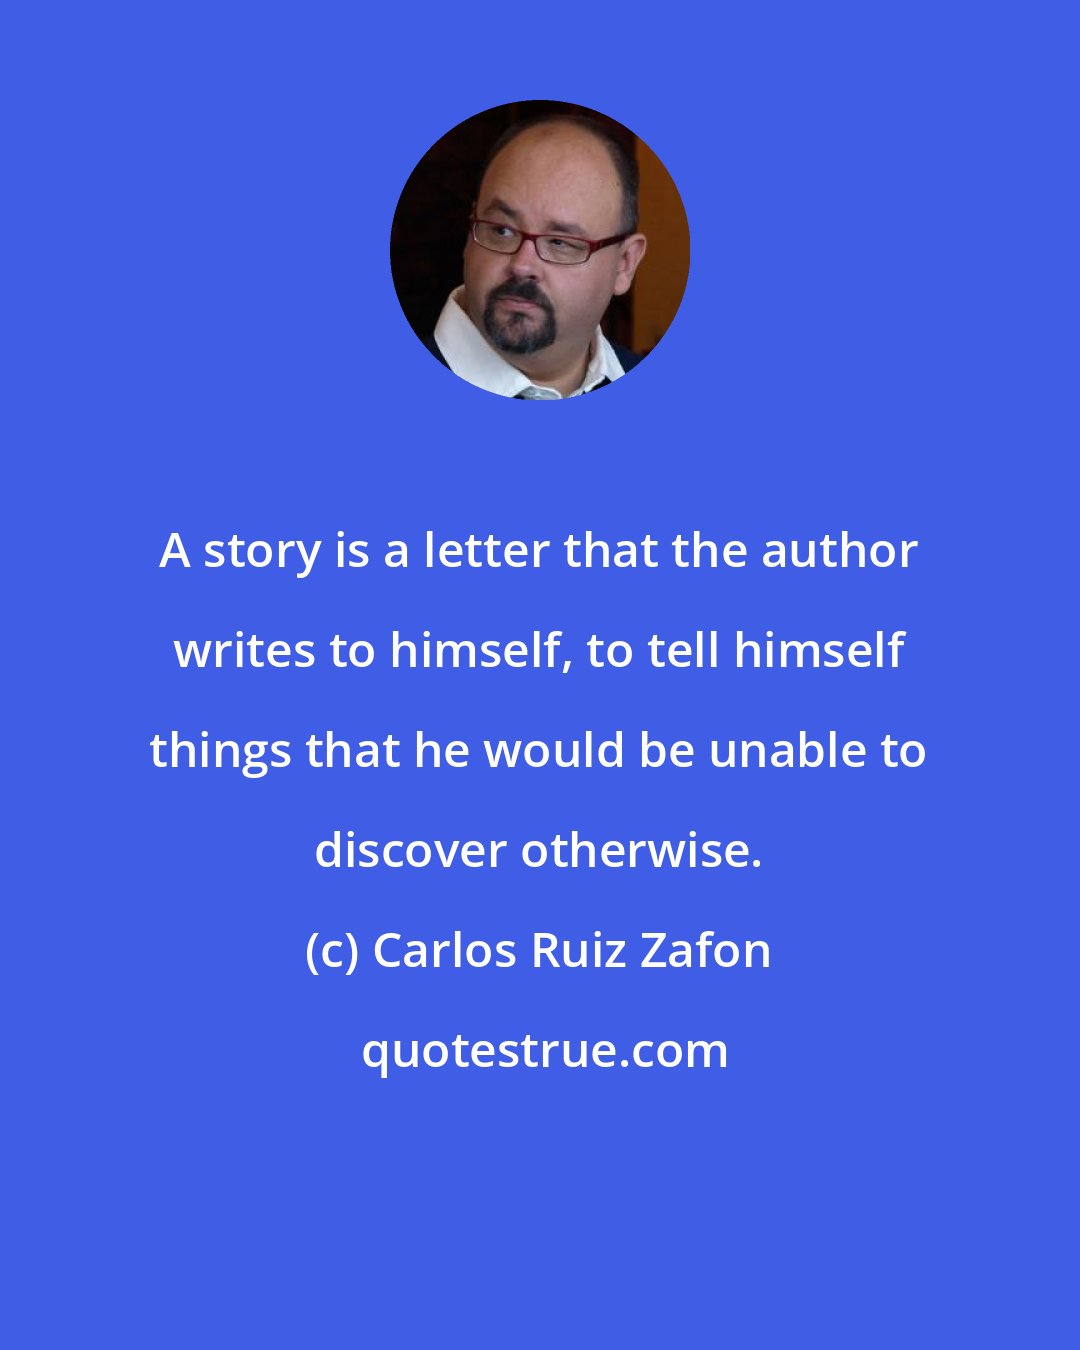 Carlos Ruiz Zafon: A story is a letter that the author writes to himself, to tell himself things that he would be unable to discover otherwise.